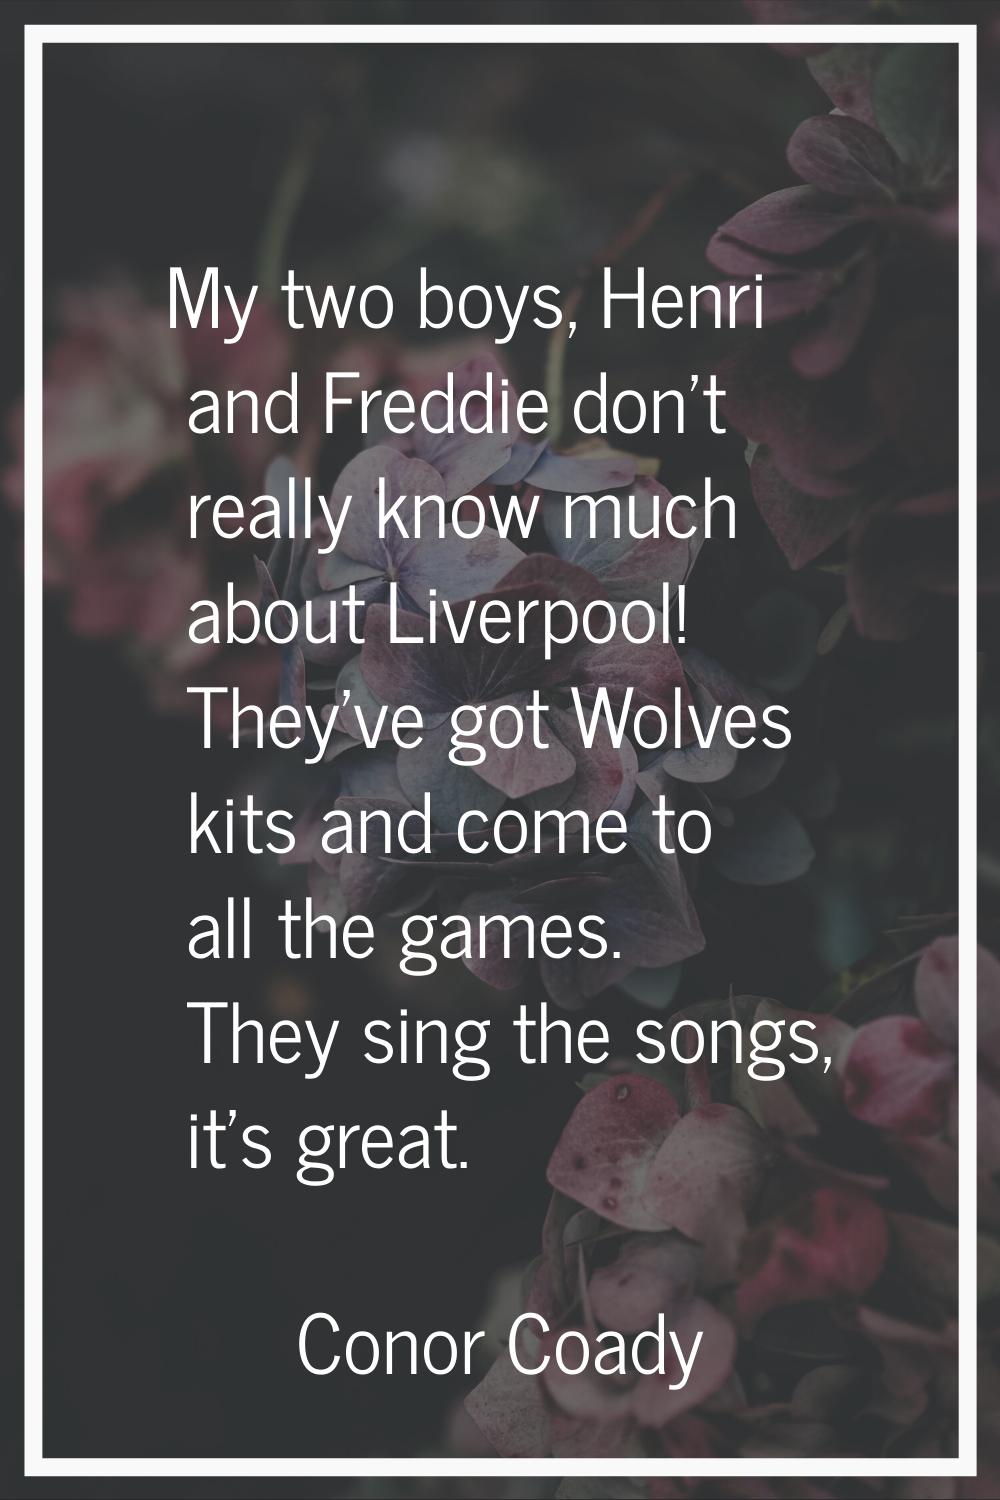 My two boys, Henri and Freddie don't really know much about Liverpool! They've got Wolves kits and 